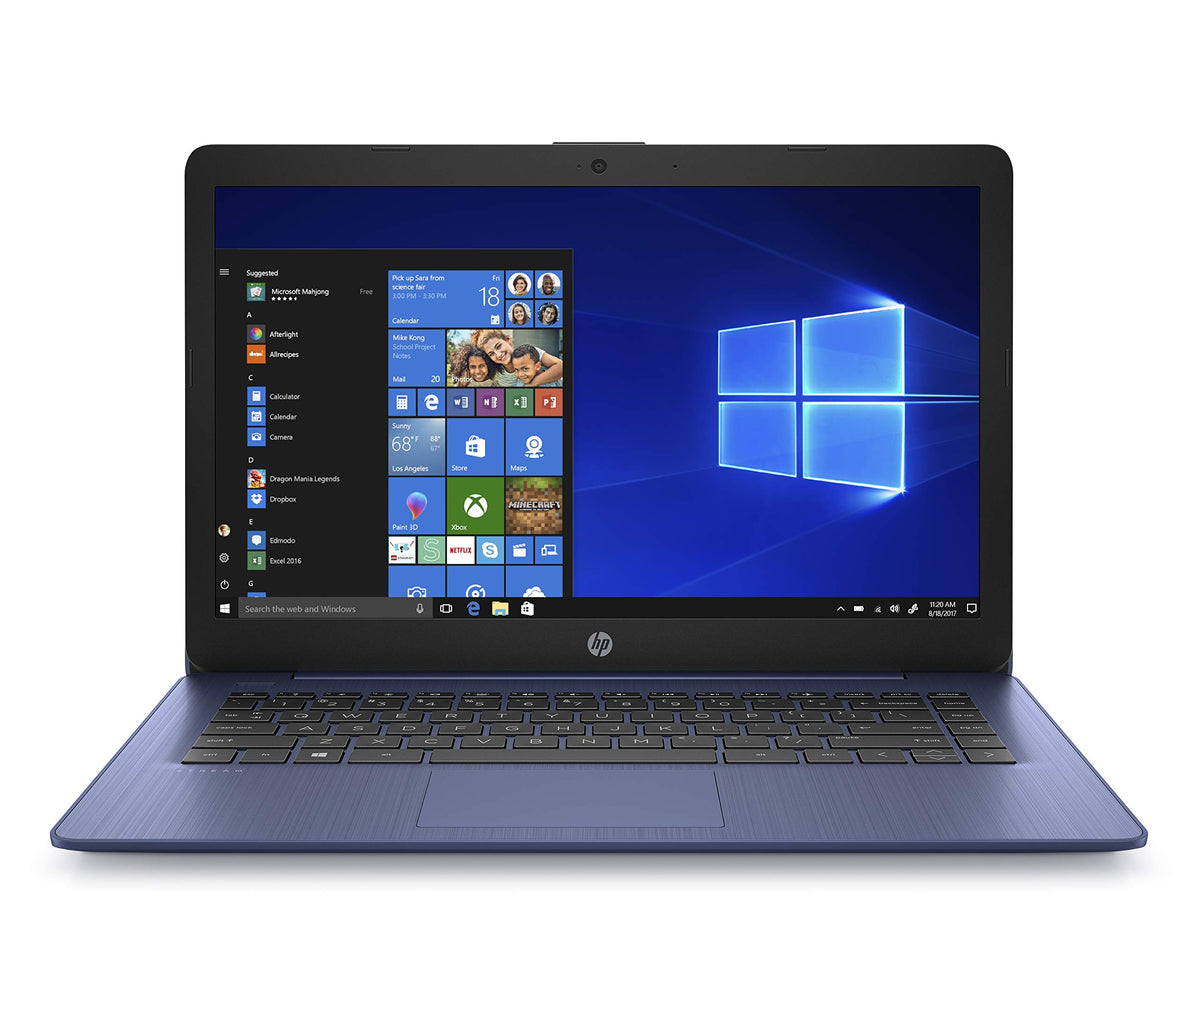 HP Stream 14-inch Laptop, Intel Celeron N4000, 4 GB RAM, 32 GB eMMC, Windows 10 Home in S Mode With Office 365 Personal For 1 Year (14-cb181nr, Royal Blue), Model Number: 9MV82UA#ABA